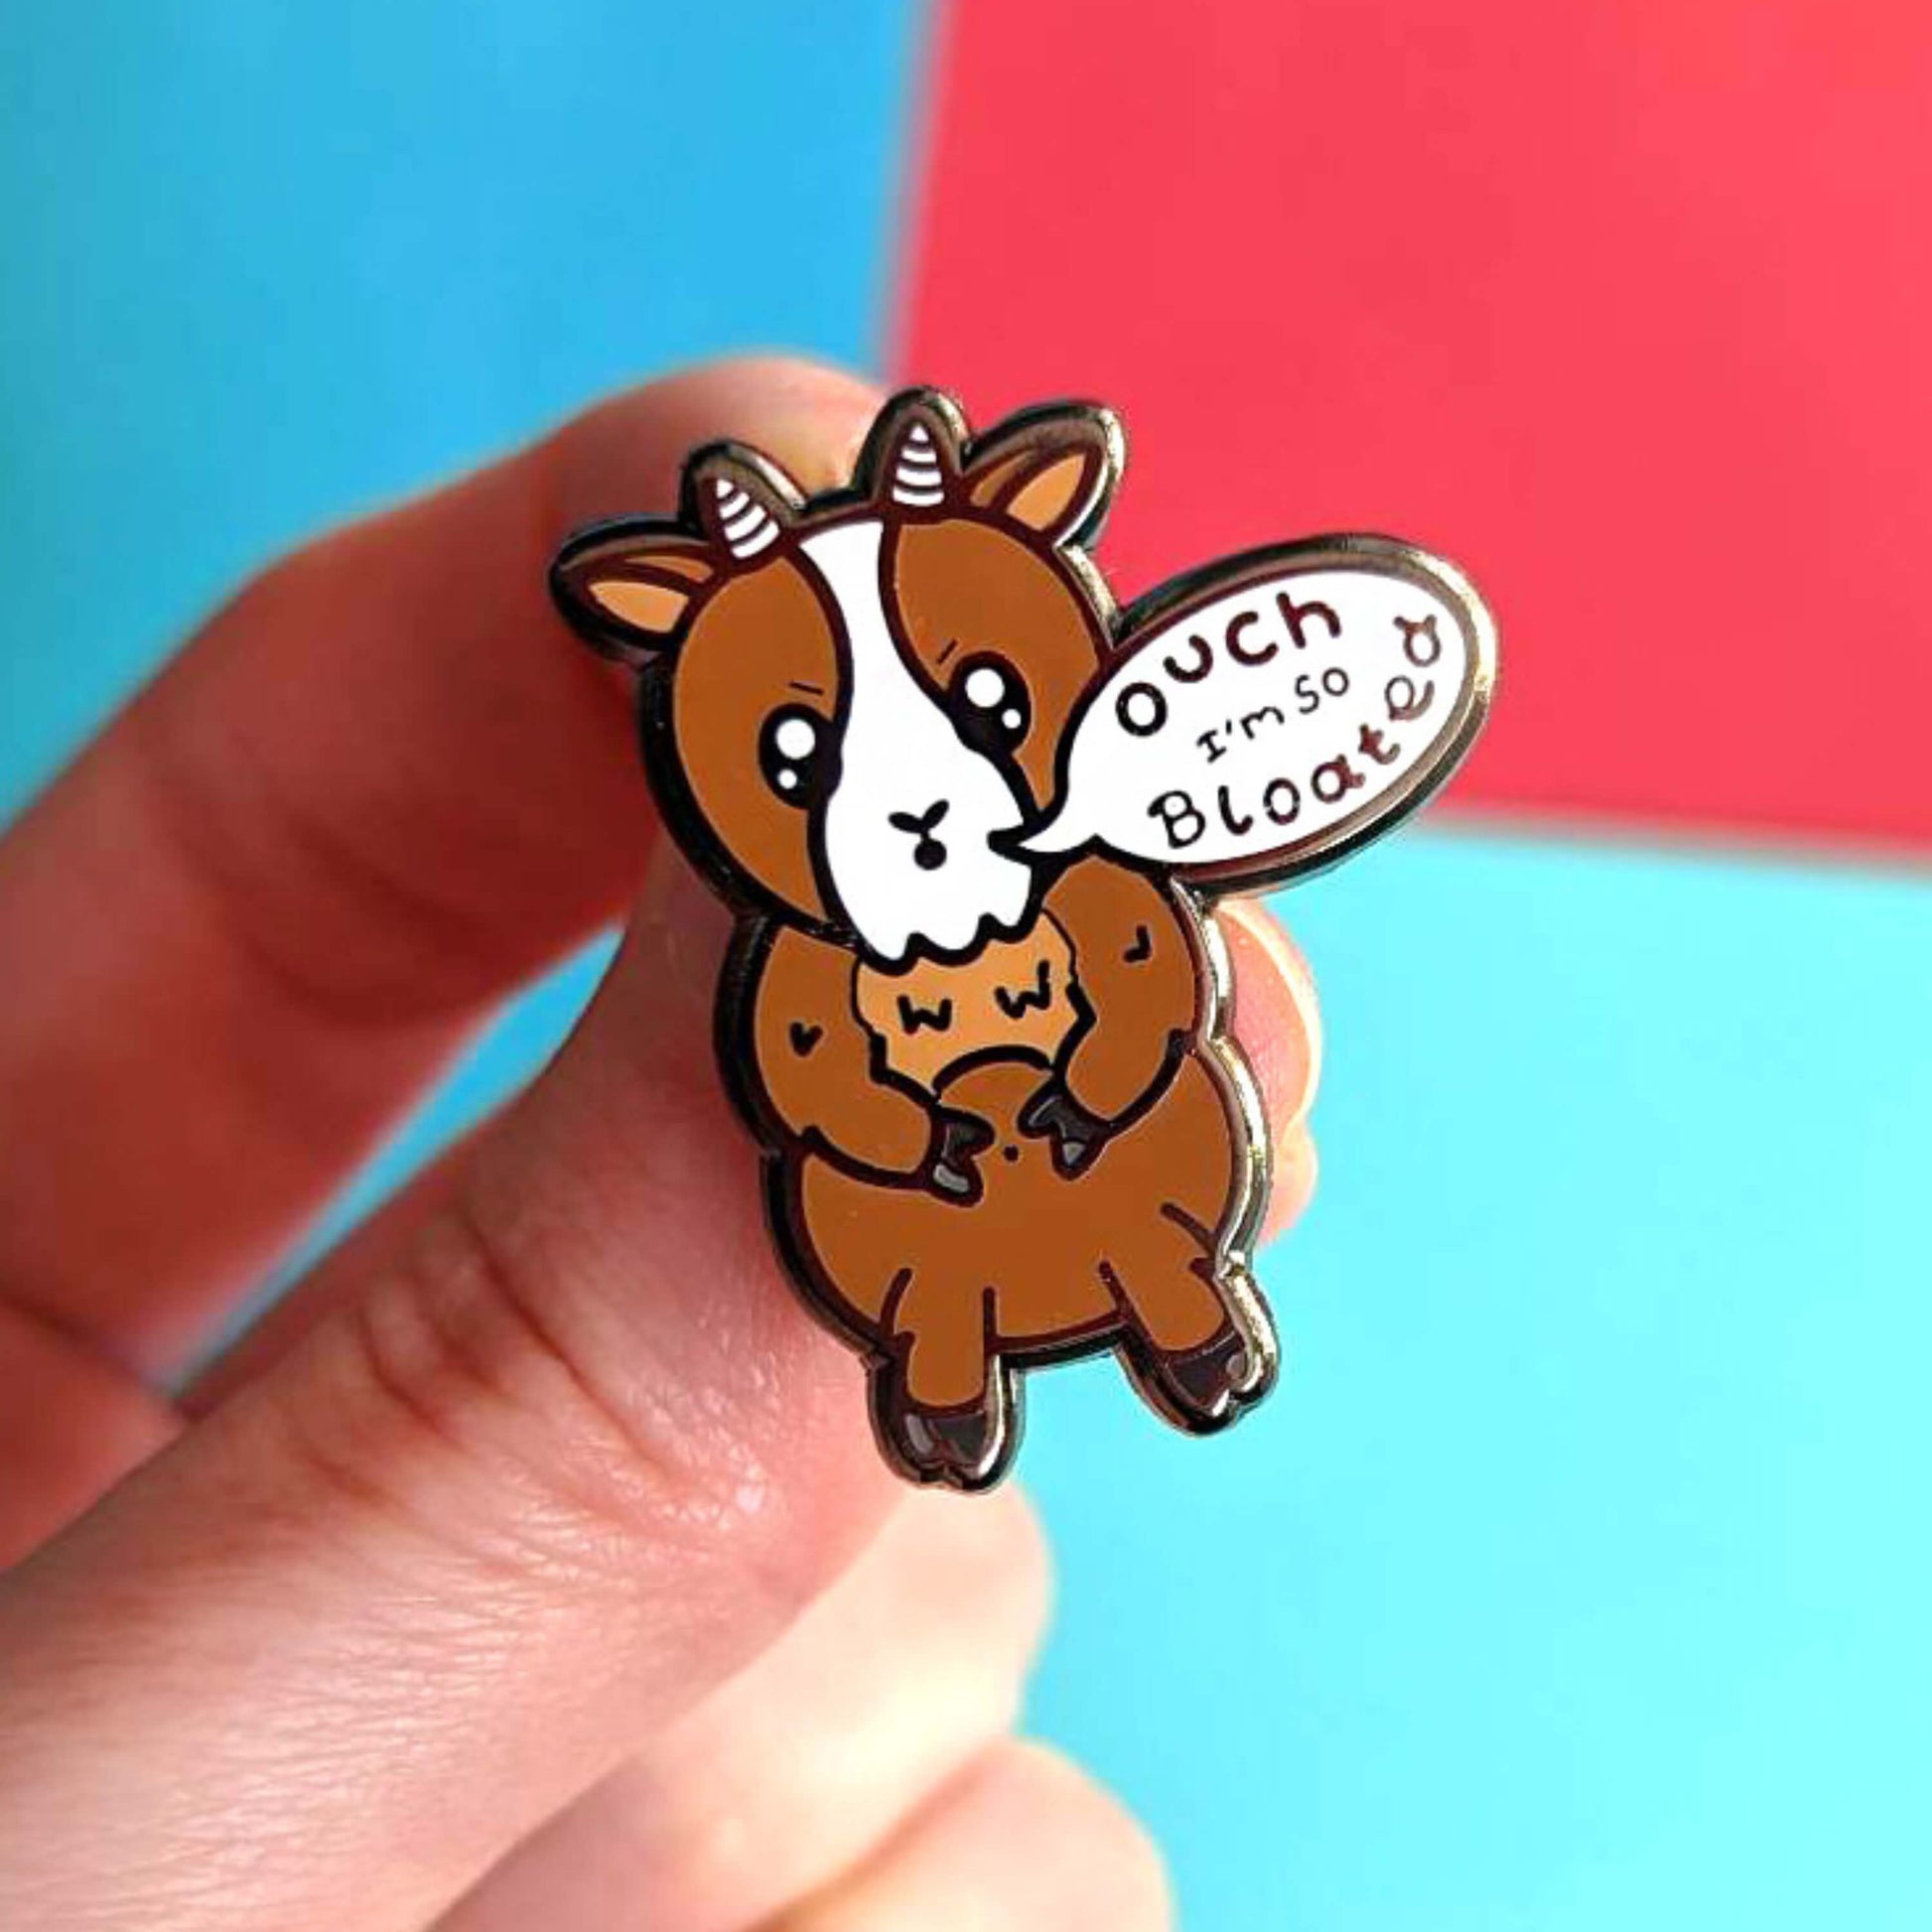 The Bloat Goat Enamel Pin held over a red and blue background. The brown frustrated goat pin badge is stood up clutching its tummy with a speech bubble reading 'ouch I'm so bloated'. The hand drawn design is raising awareness for chronic illnesses or hidden disabilities that cause bloating.